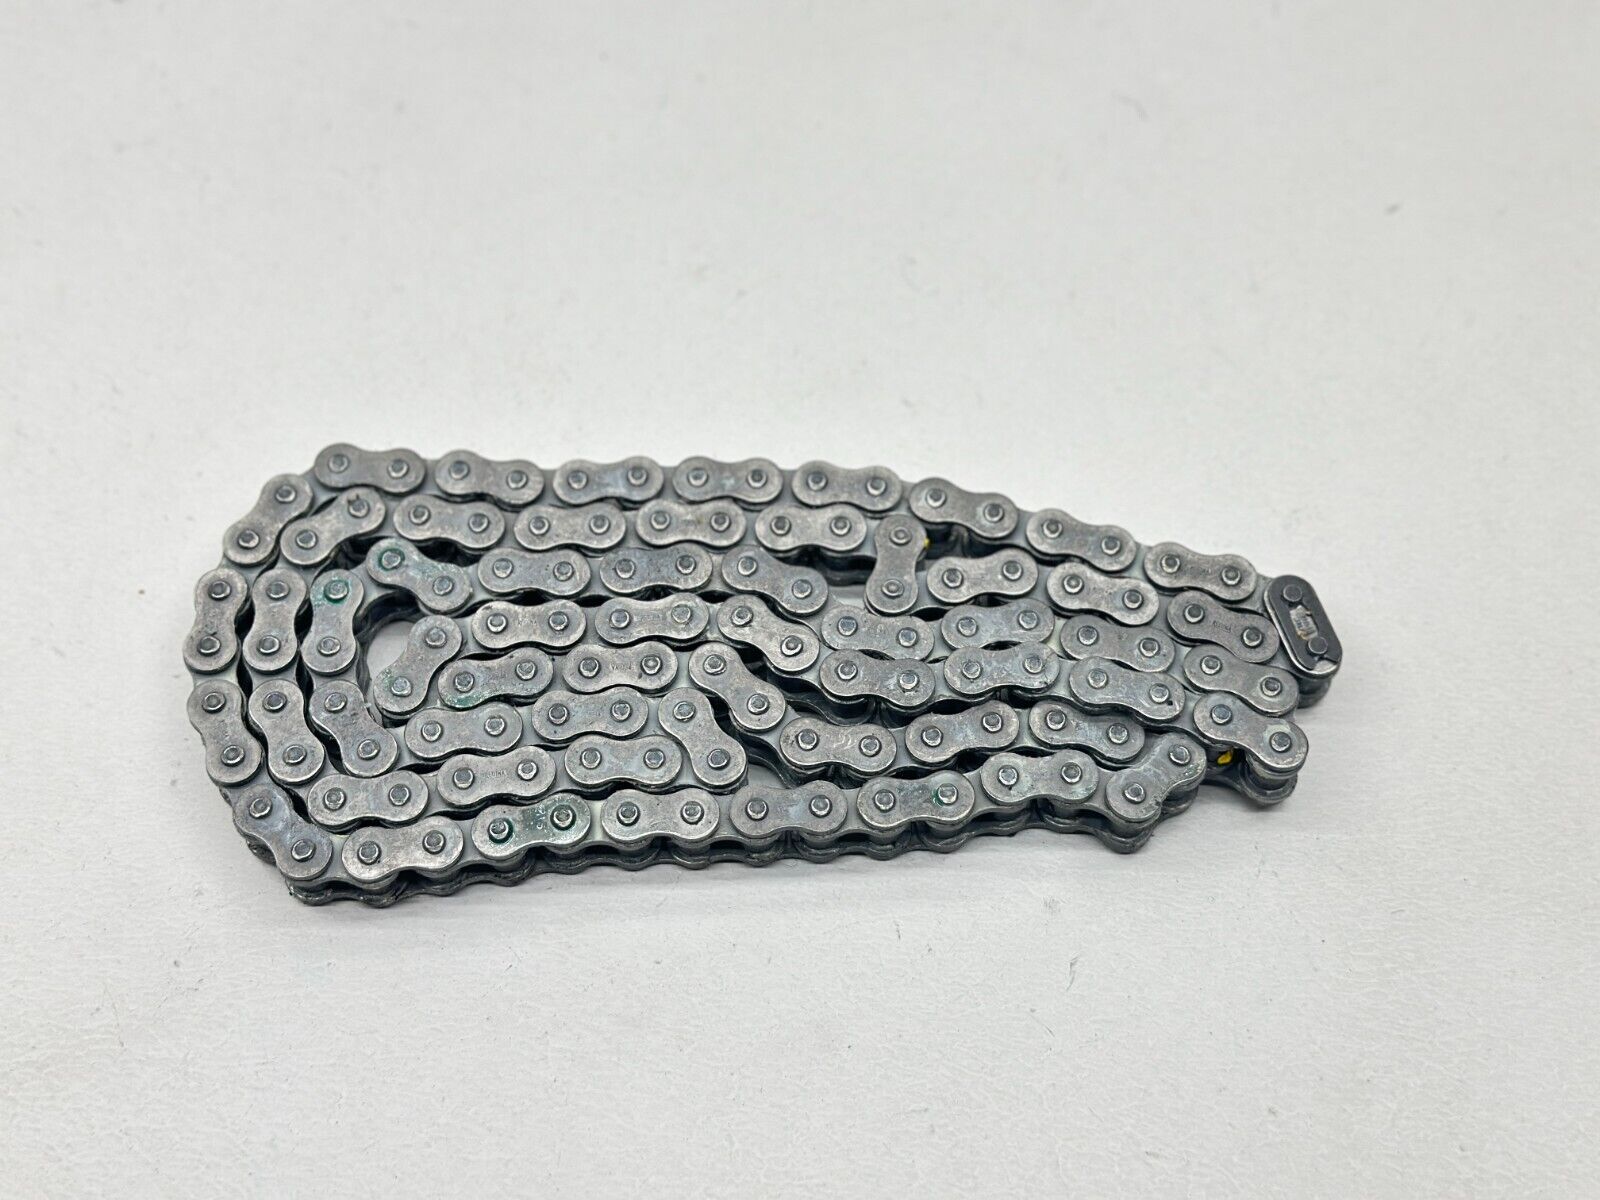 New 2023 Husqvarna TC85 Motorcycle Chain Master Connecting Link 47010165124 KTM